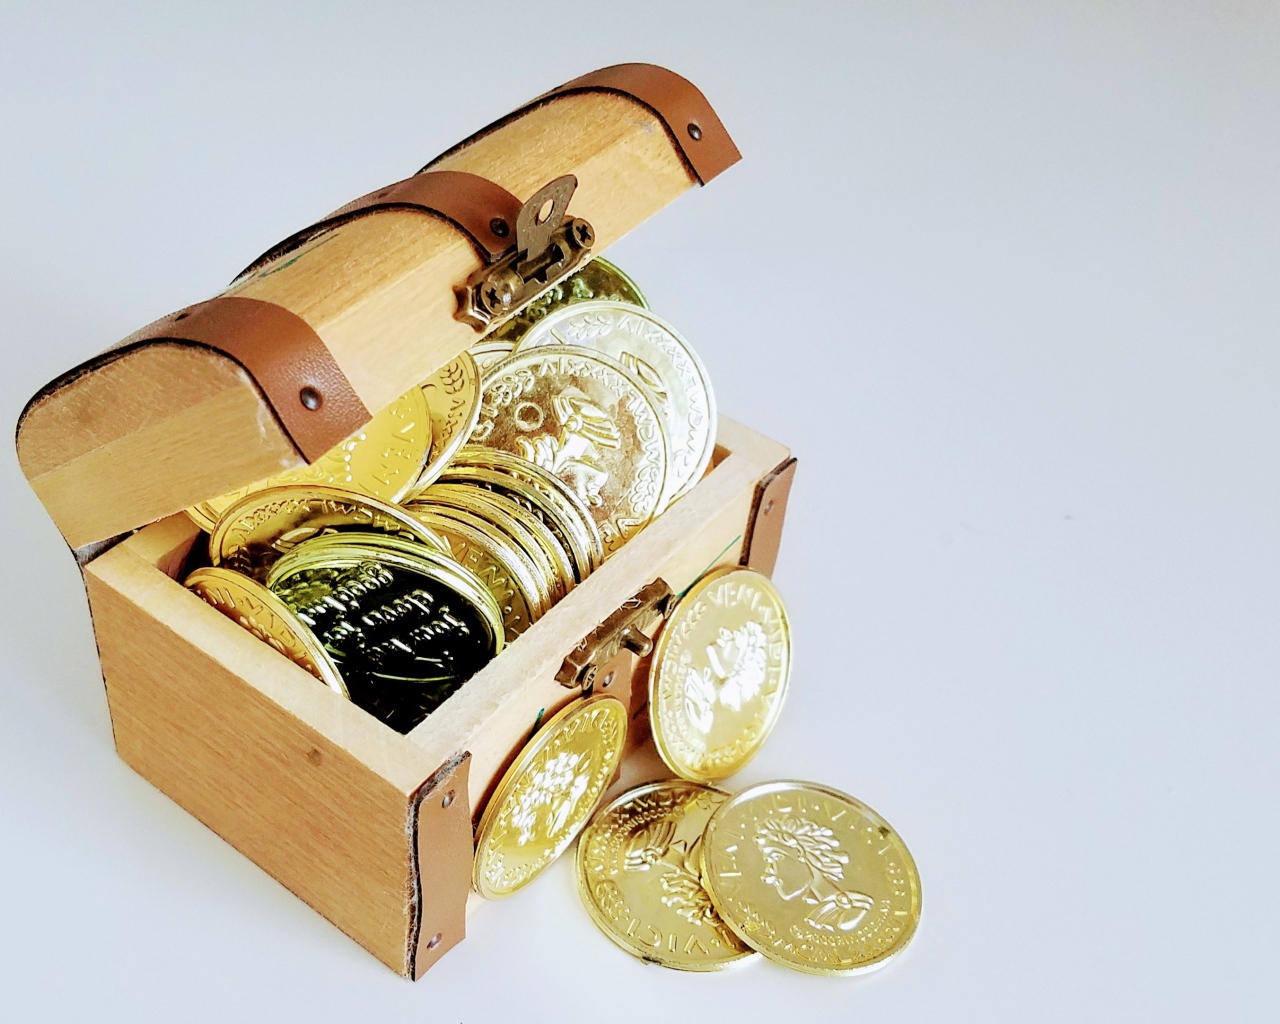 Gold coins in a chest on a gray background